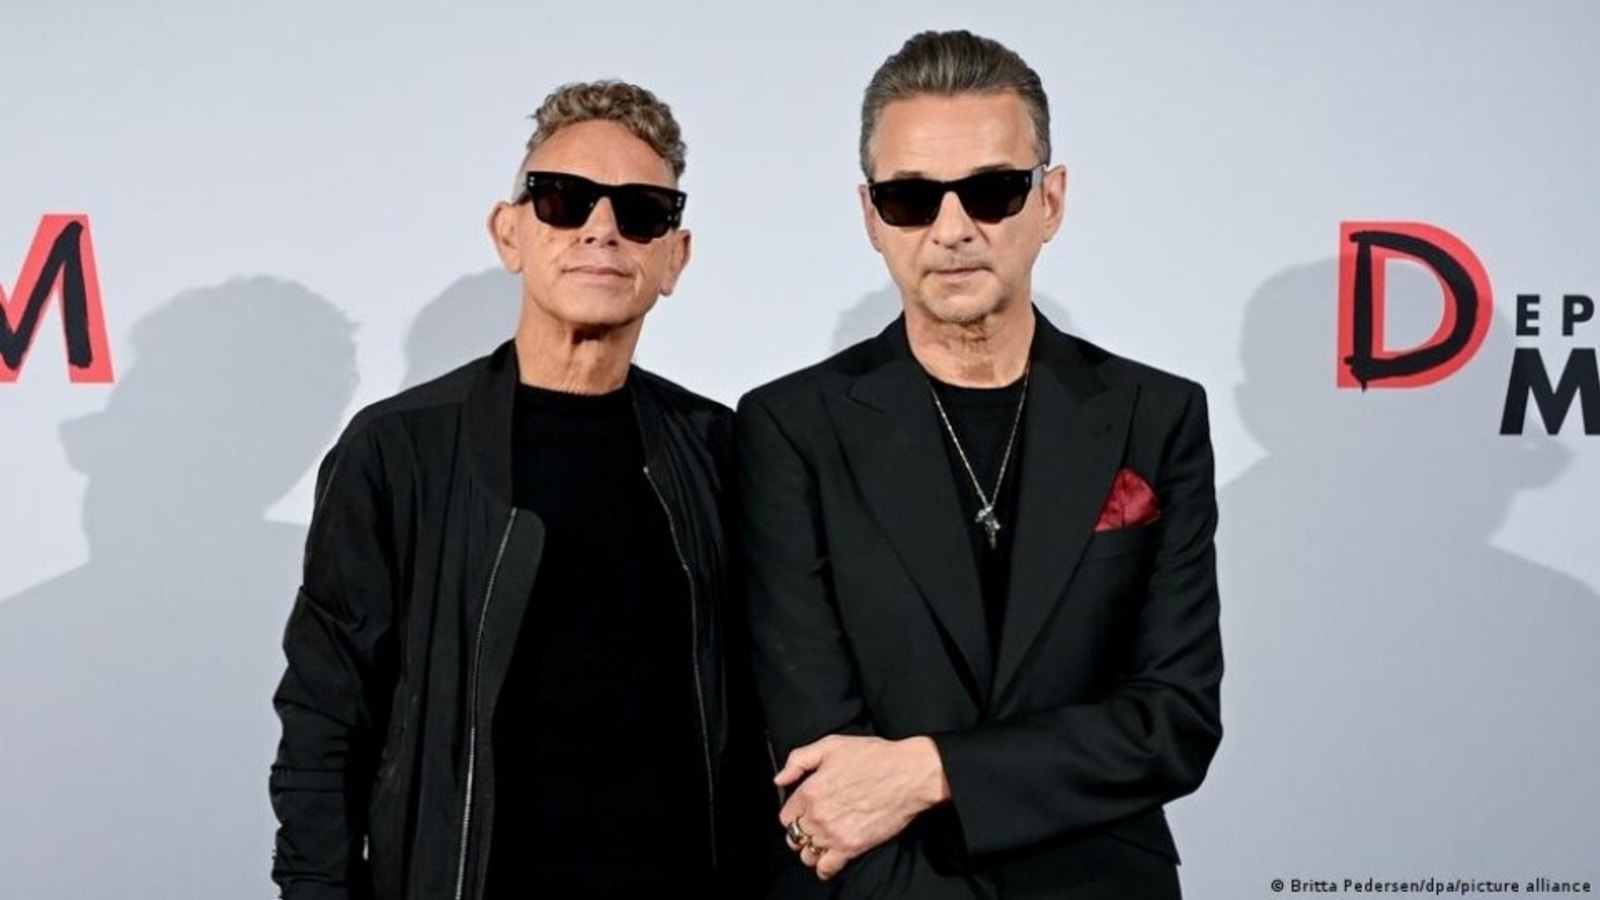 The Portable-Infinite: Depeche Mode Announce Additional European Shows in  Winter 2024